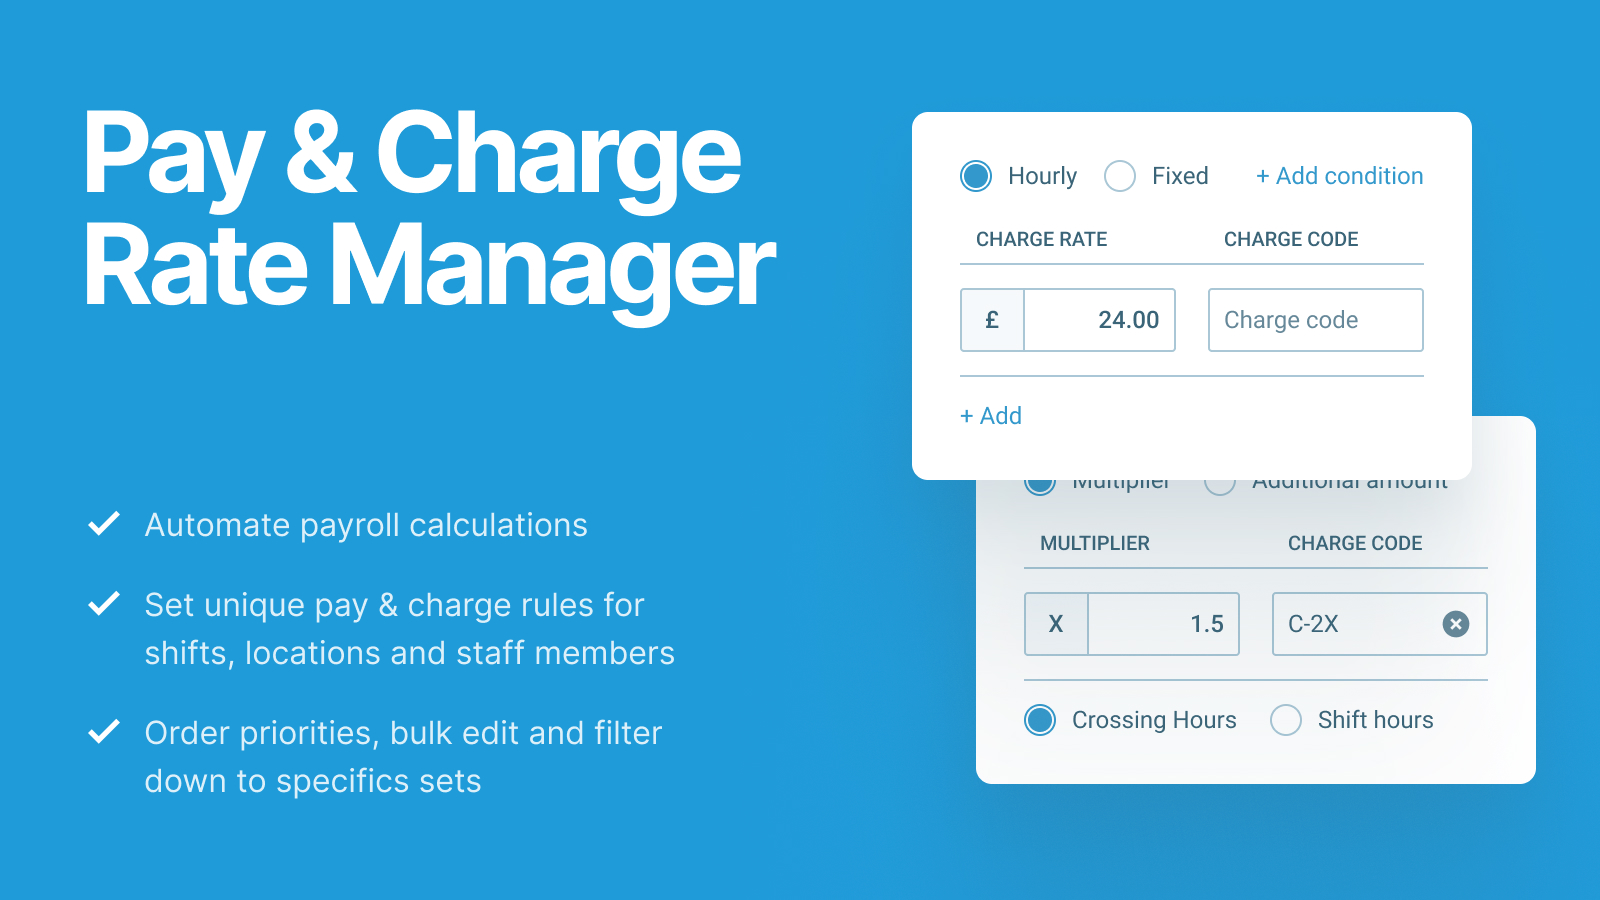 Pay & Charge Rate Manager